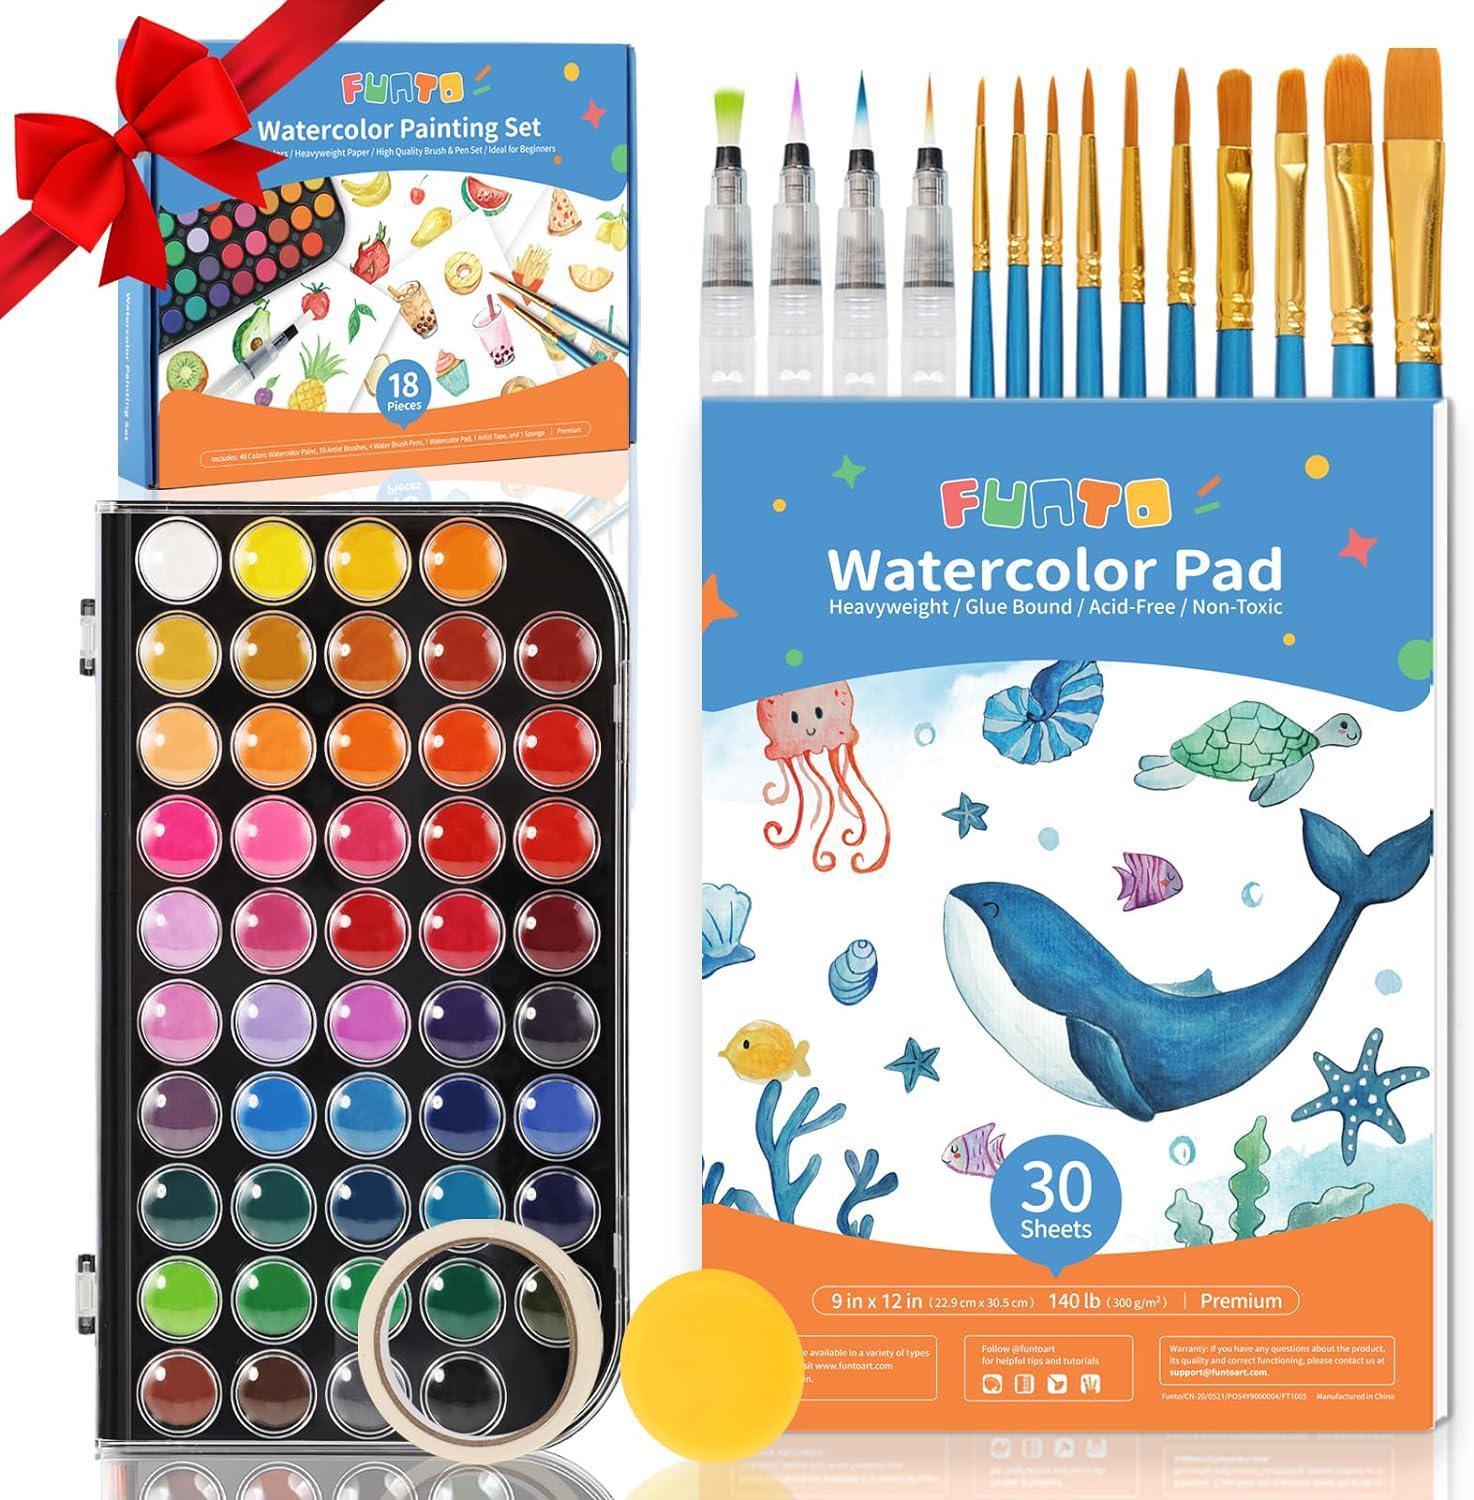 48 Colors Watercolor Paint, Washable Watercolor Paint Set with 3 Paint  Brushes and Palette, Non-toxic Water Color Paints Sets for Kids, Adults,  Beginners and Artists 